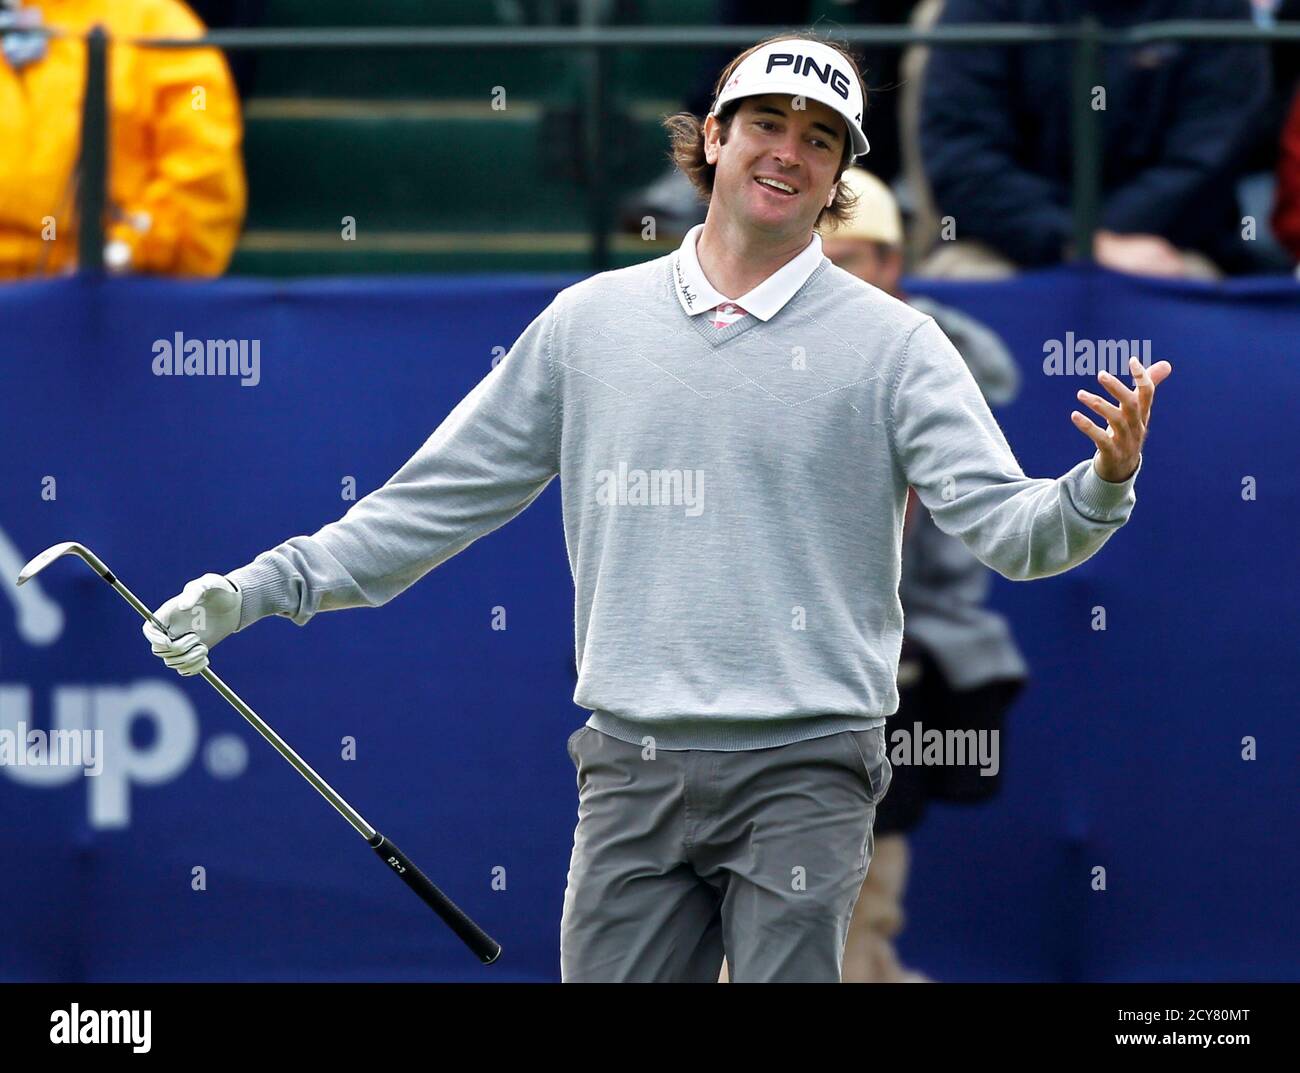 U.S. golfer Bubba Watson reacts to his bunker shot onto the 18th green in final round play on Torrey Pines South course during the Farmers Insurance Open PGA golf tournament in San Diego, California January 30, 2011. REUTERS/Mike Blake (UNITED STATES - Tags: SPORT GOLF) Stock Photo